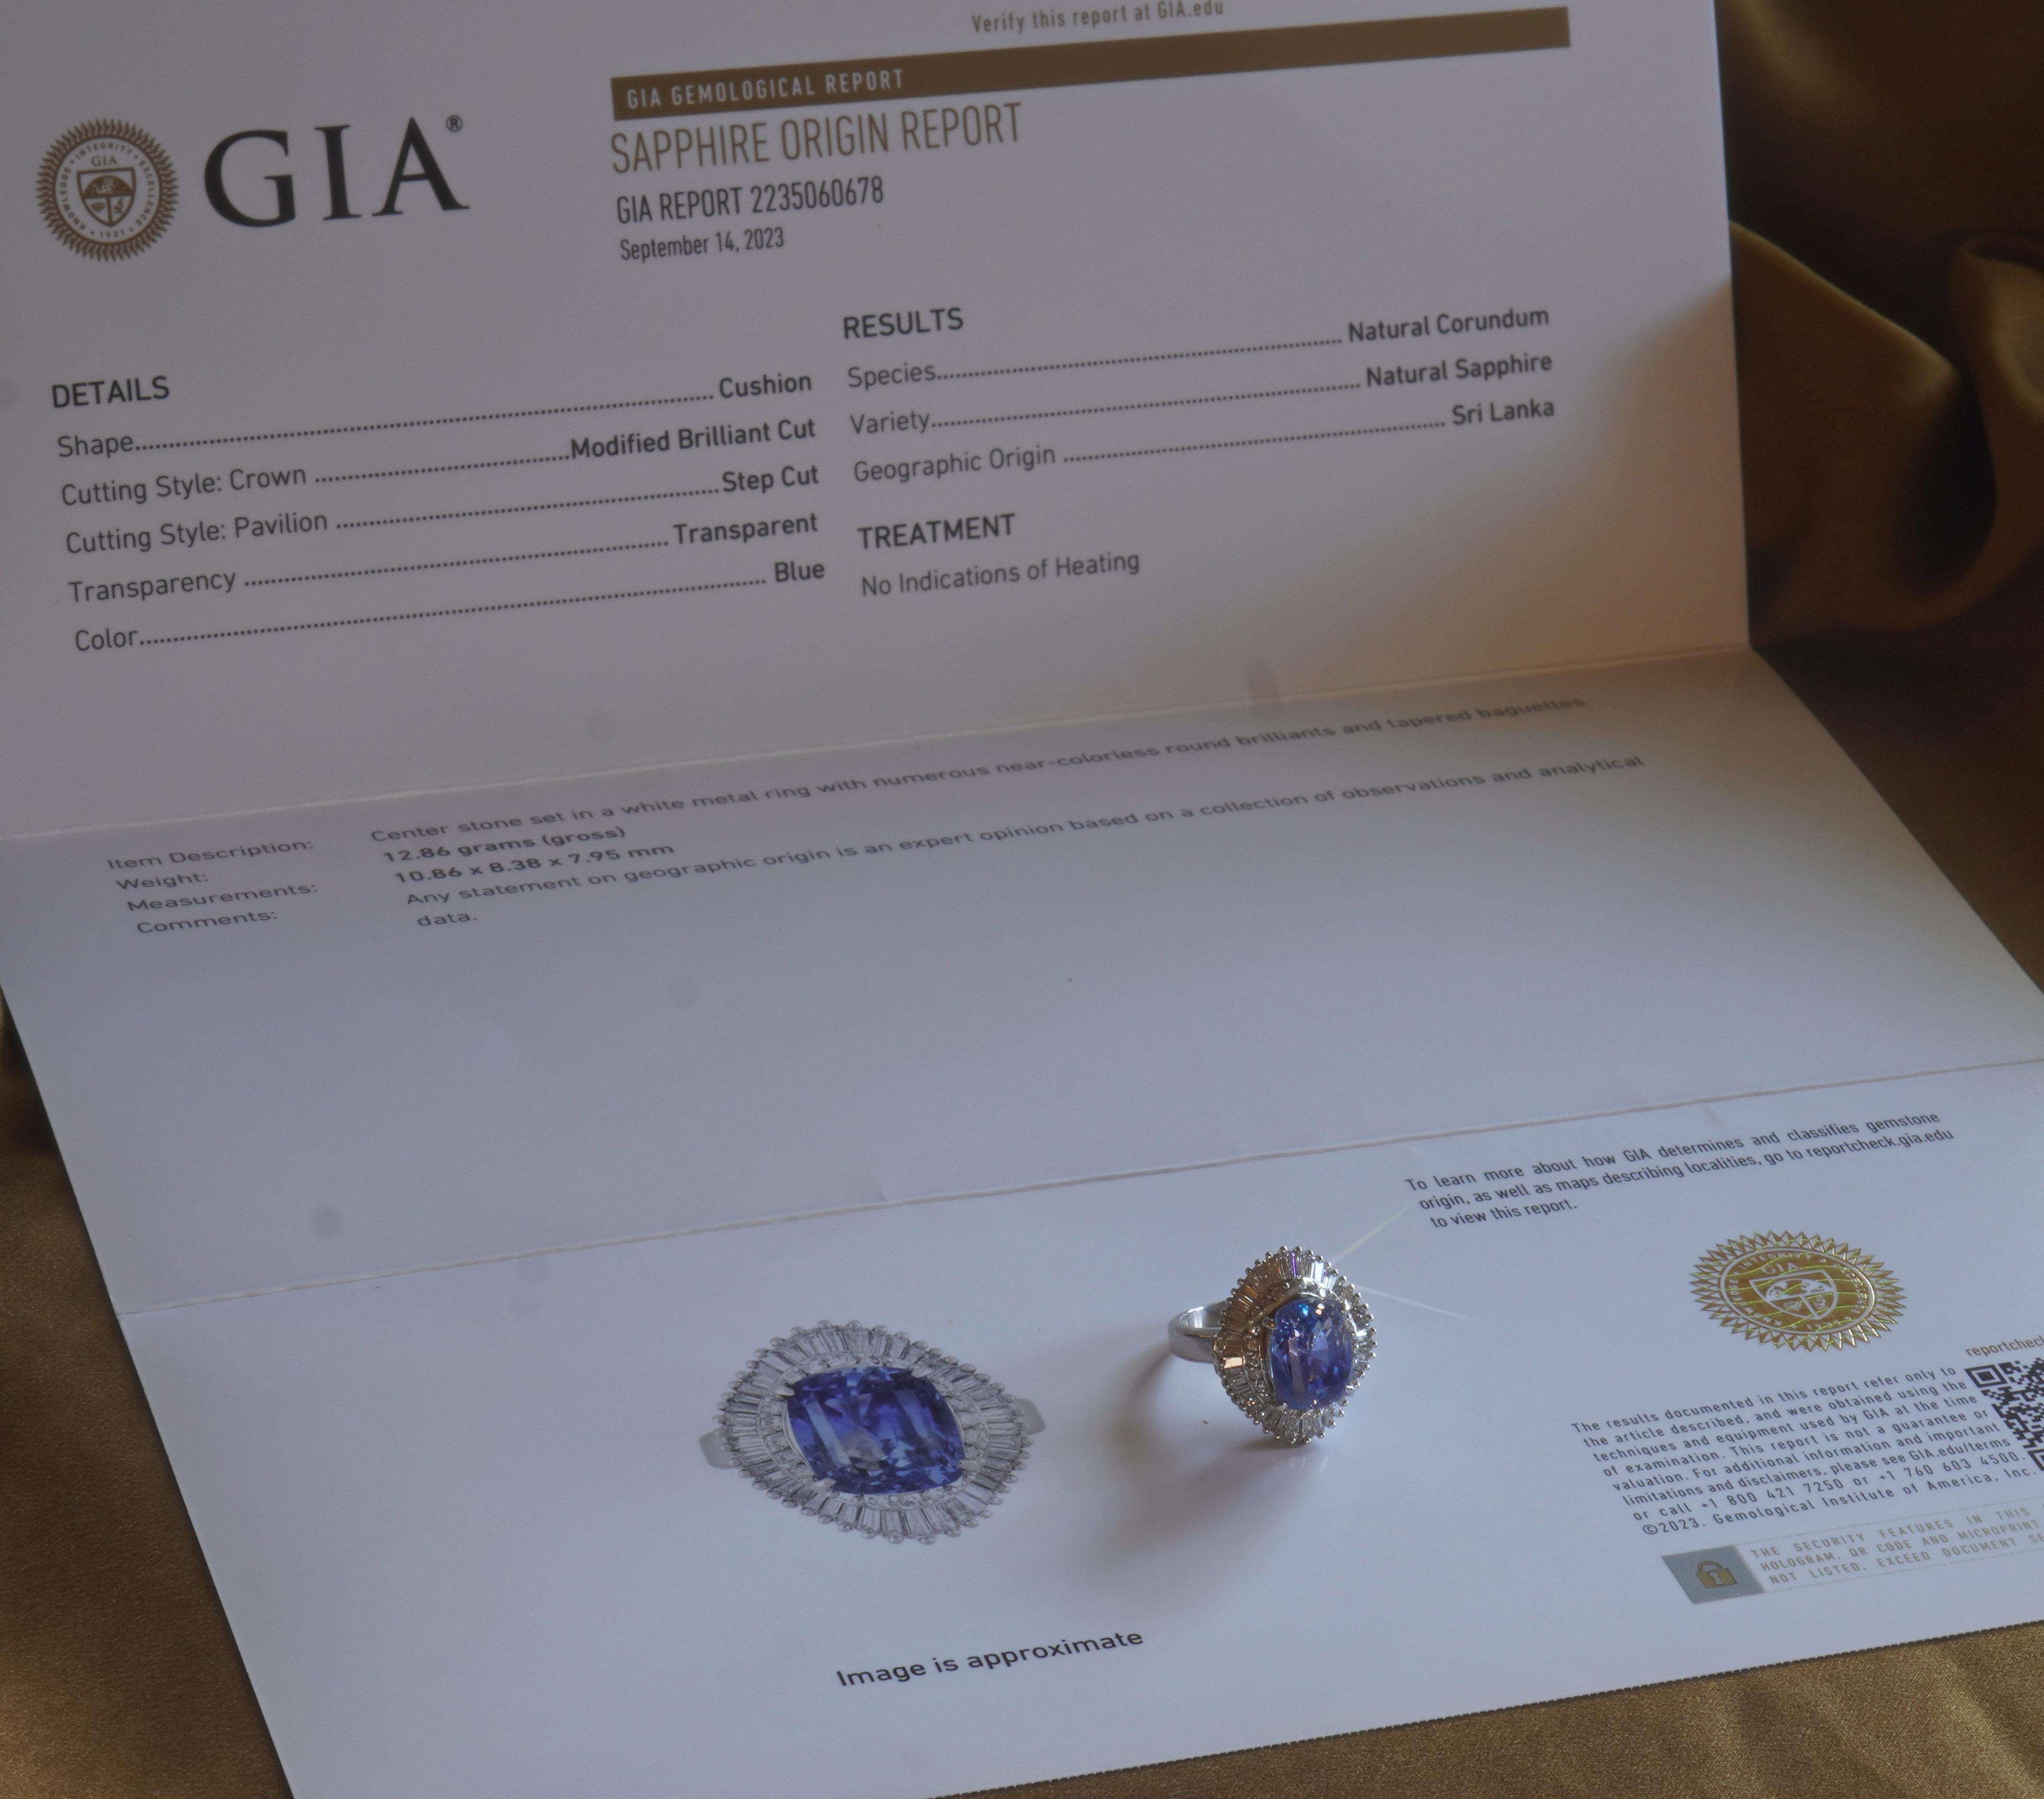 Old South Jewels proudly presents... VINTAGE LUXURY.   GIA CERTIFIED PLATINUM 9.38 CARAT UNHEATED SAPPHIRE DIAMOND VINTAGE RING & BOX!    6.55 CARAT FINE BLUE GIA CERTIFIED RARE NO HEAT NATURAL SAPPHIRE.   This Gorgeous Sapphire Is Crowned With 2.83